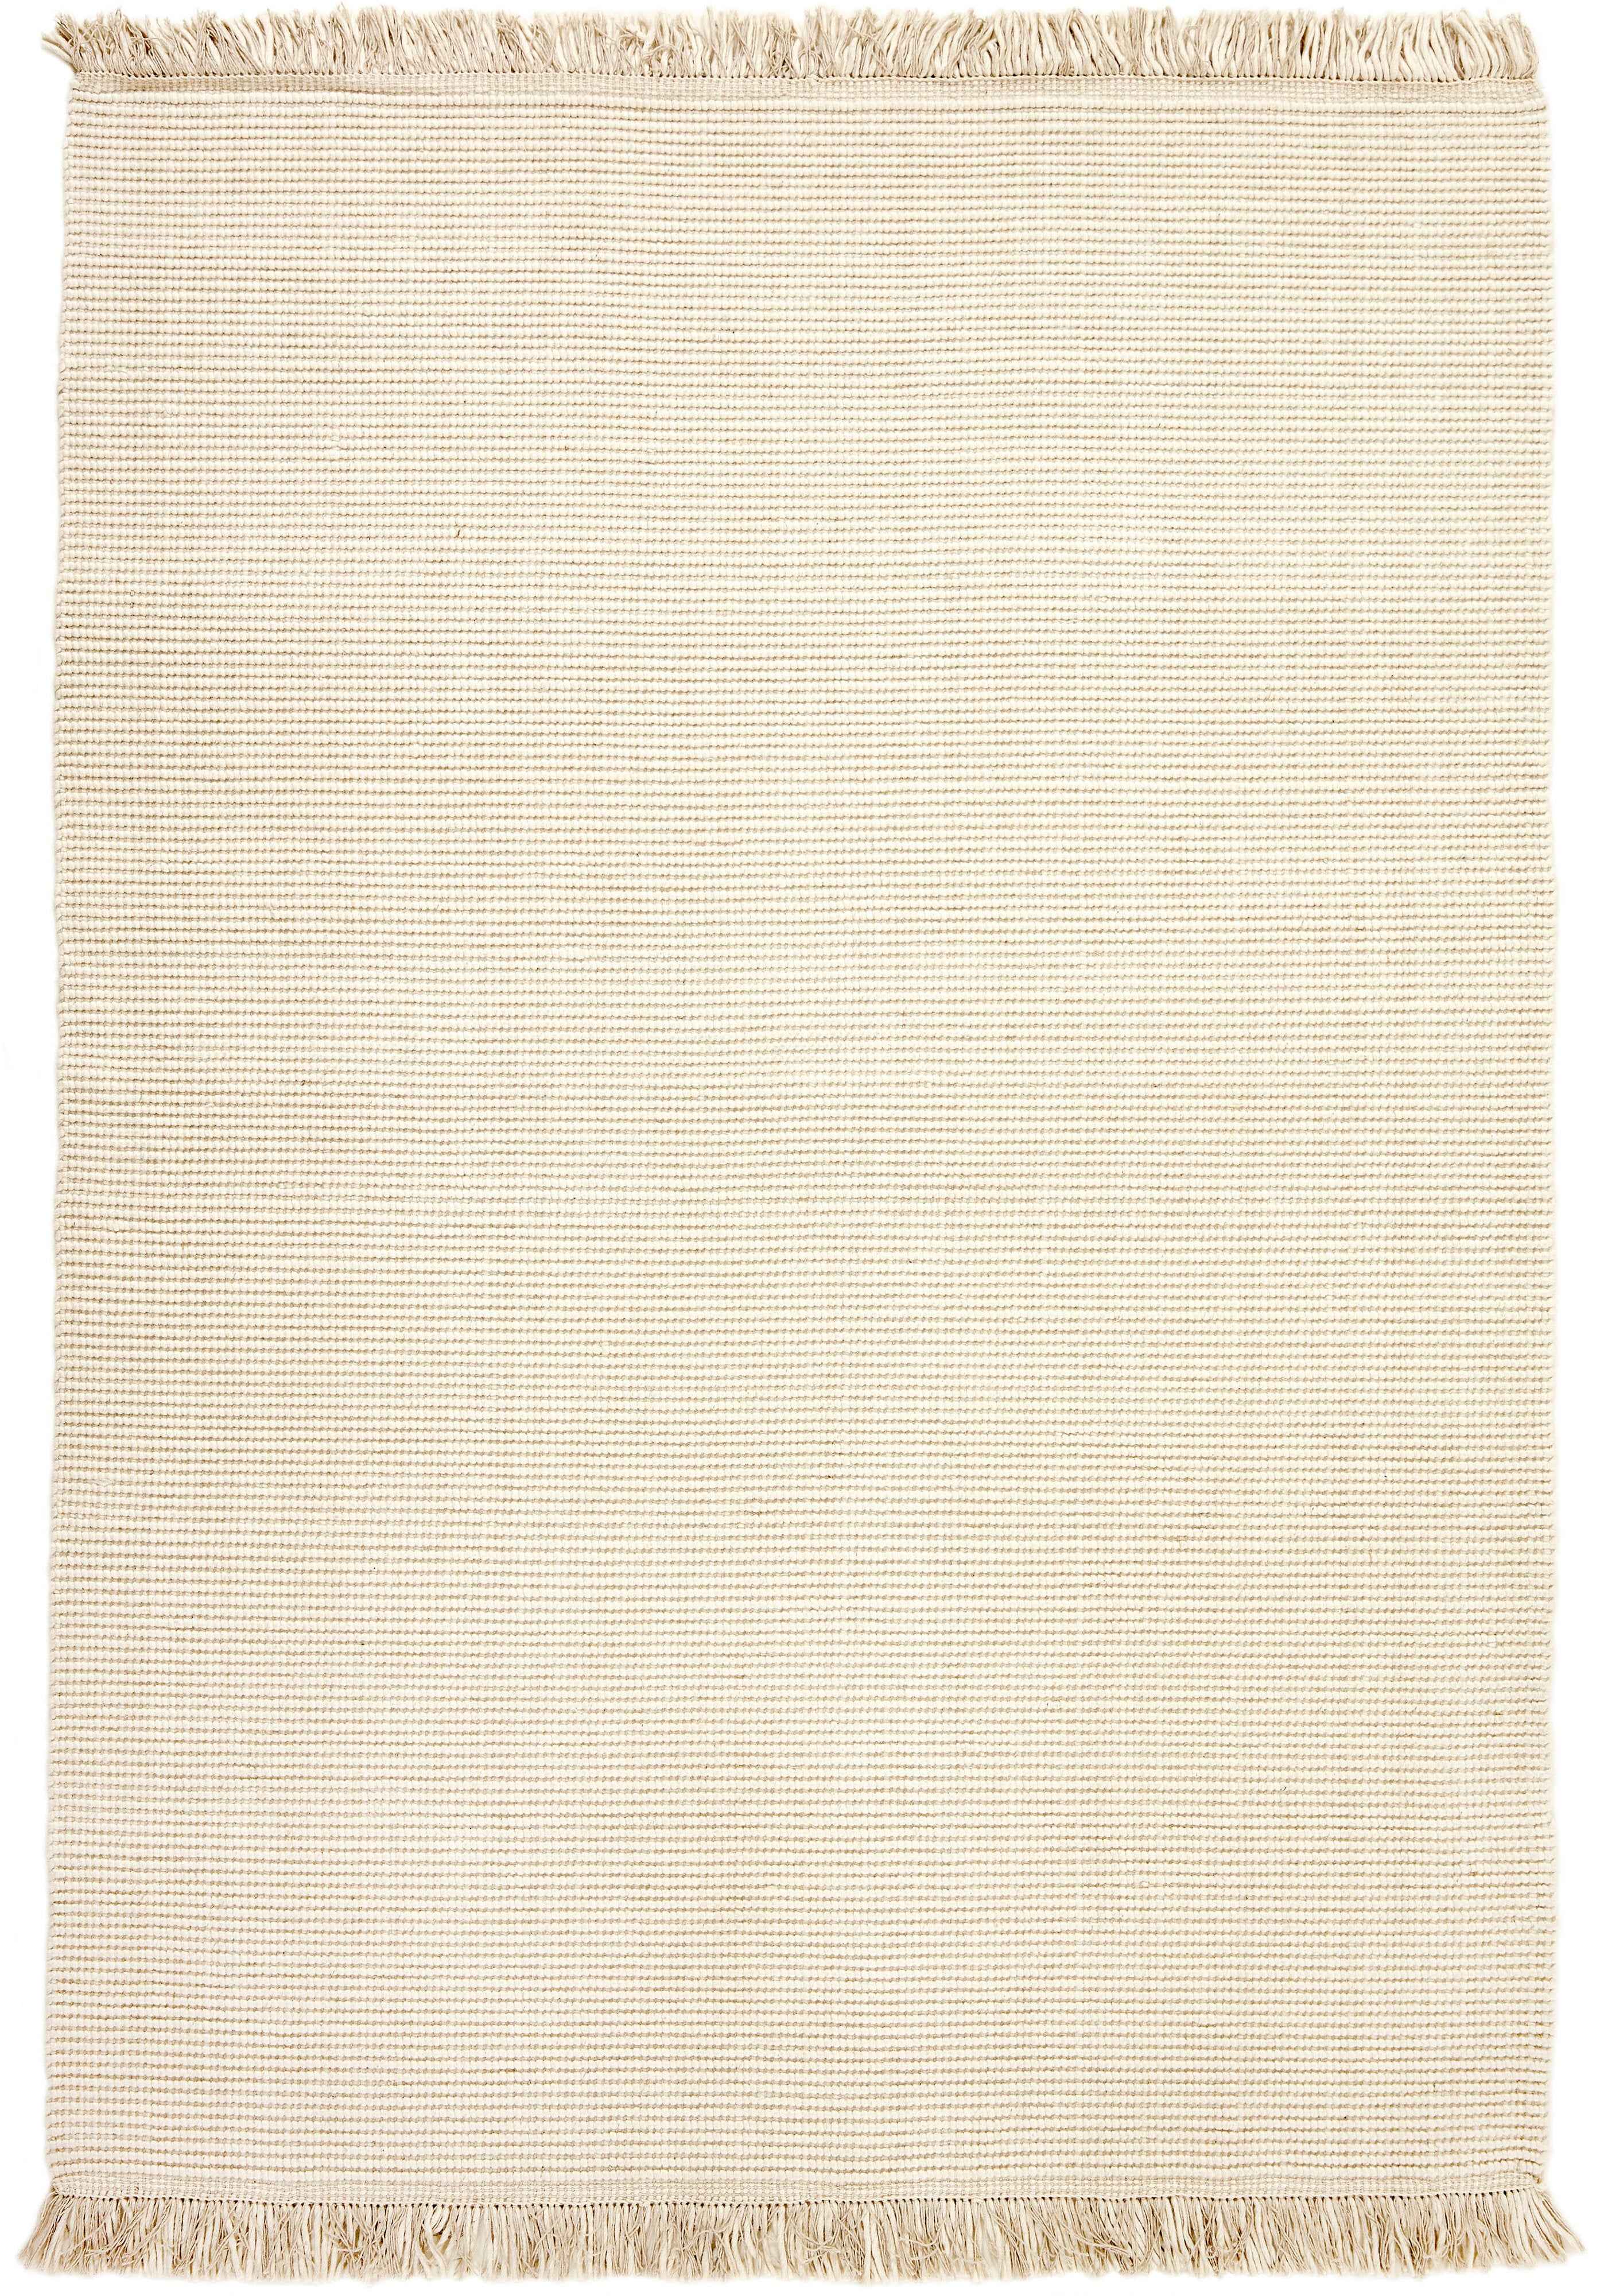 90x60 cm Indian Wool Multicolor Rug-5971A, White - Rugmaster